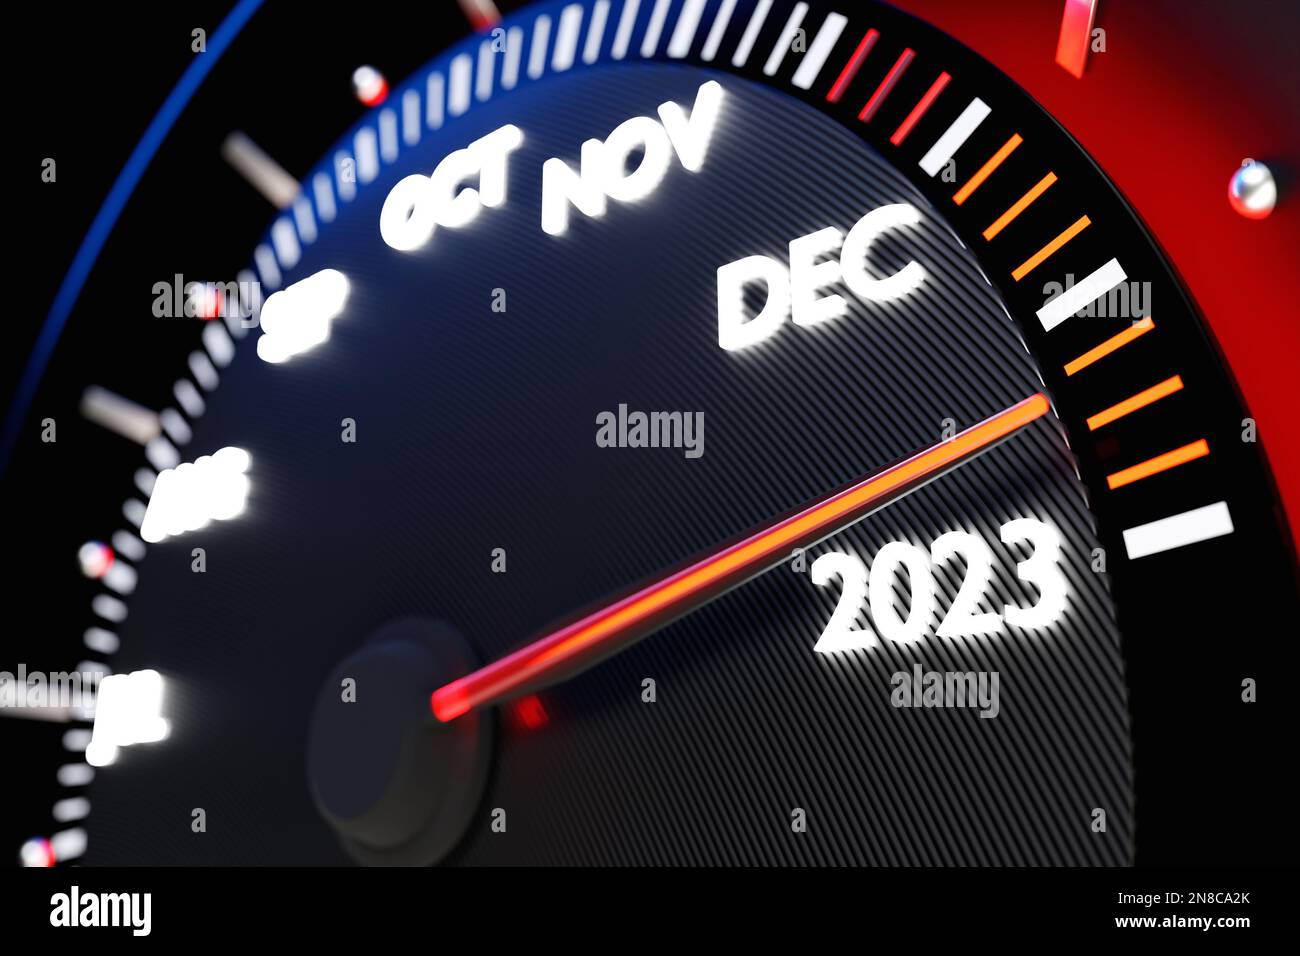 Why your car's speedometer goes up to 160 mph | CNN Business